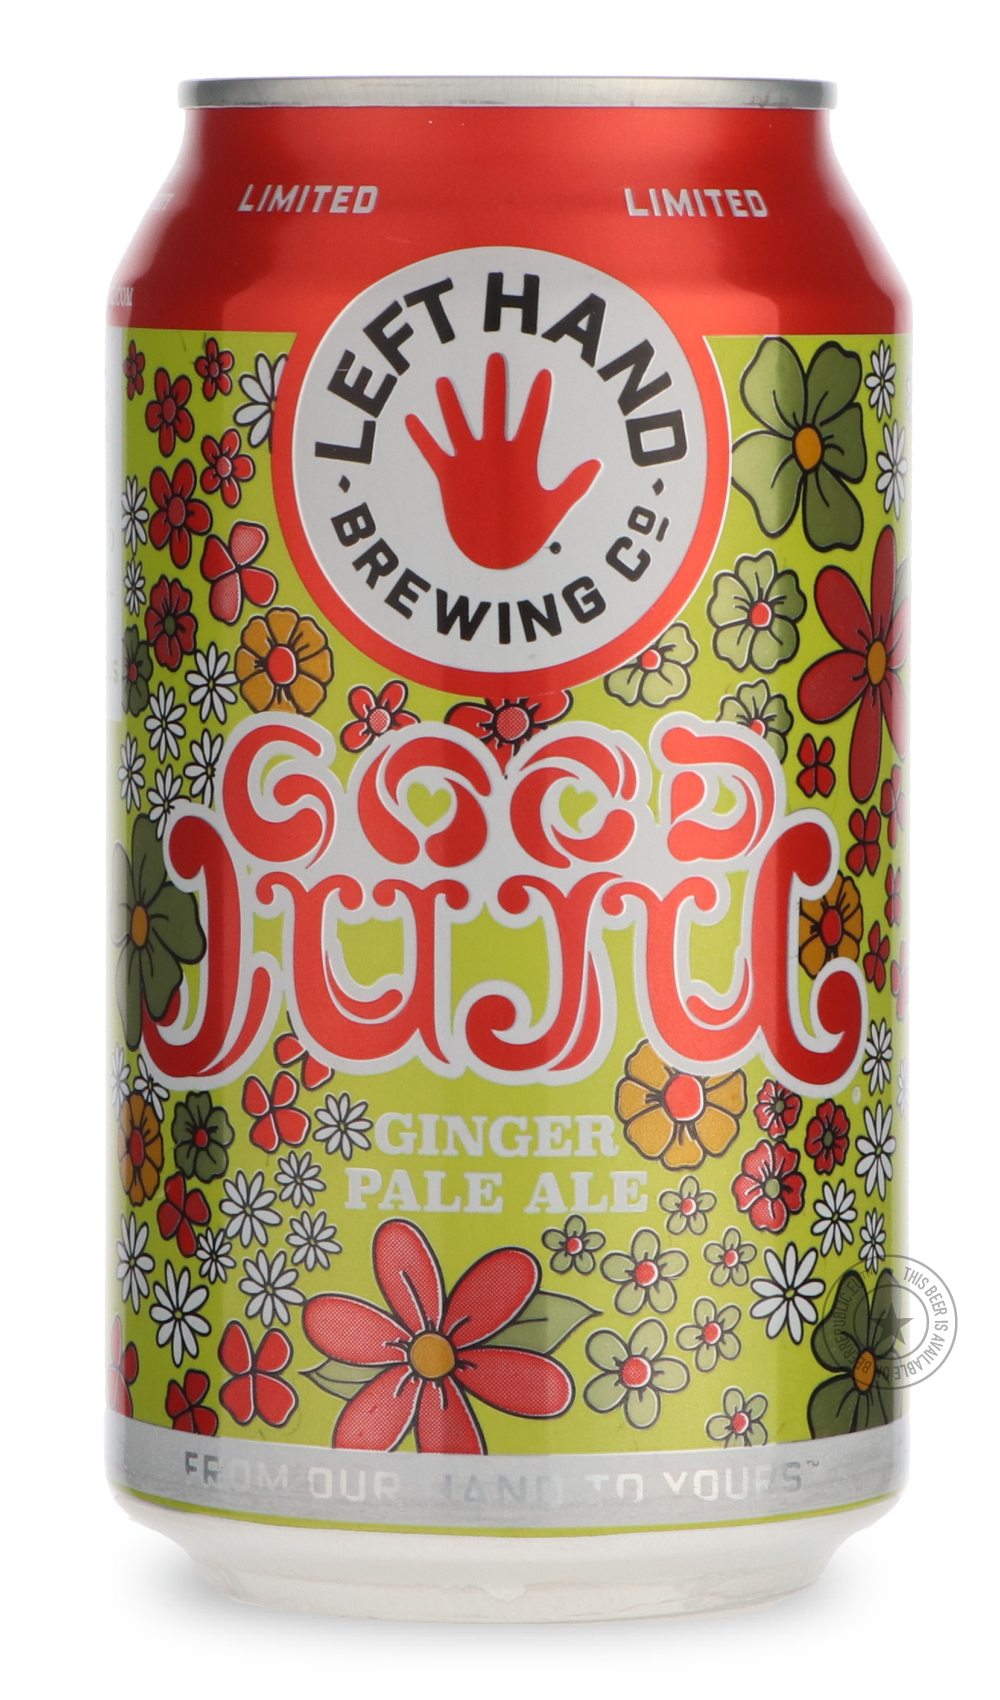 -Left Hand- Good Juju-Specials- Only @ Beer Republic - The best online beer store for American & Canadian craft beer - Buy beer online from the USA and Canada - Bier online kopen - Amerikaans bier kopen - Craft beer store - Craft beer kopen - Amerikanisch bier kaufen - Bier online kaufen - Acheter biere online - IPA - Stout - Porter - New England IPA - Hazy IPA - Imperial Stout - Barrel Aged - Barrel Aged Imperial Stout - Brown - Dark beer - Blond - Blonde - Pilsner - Lager - Wheat - Weizen - Amber - Barley